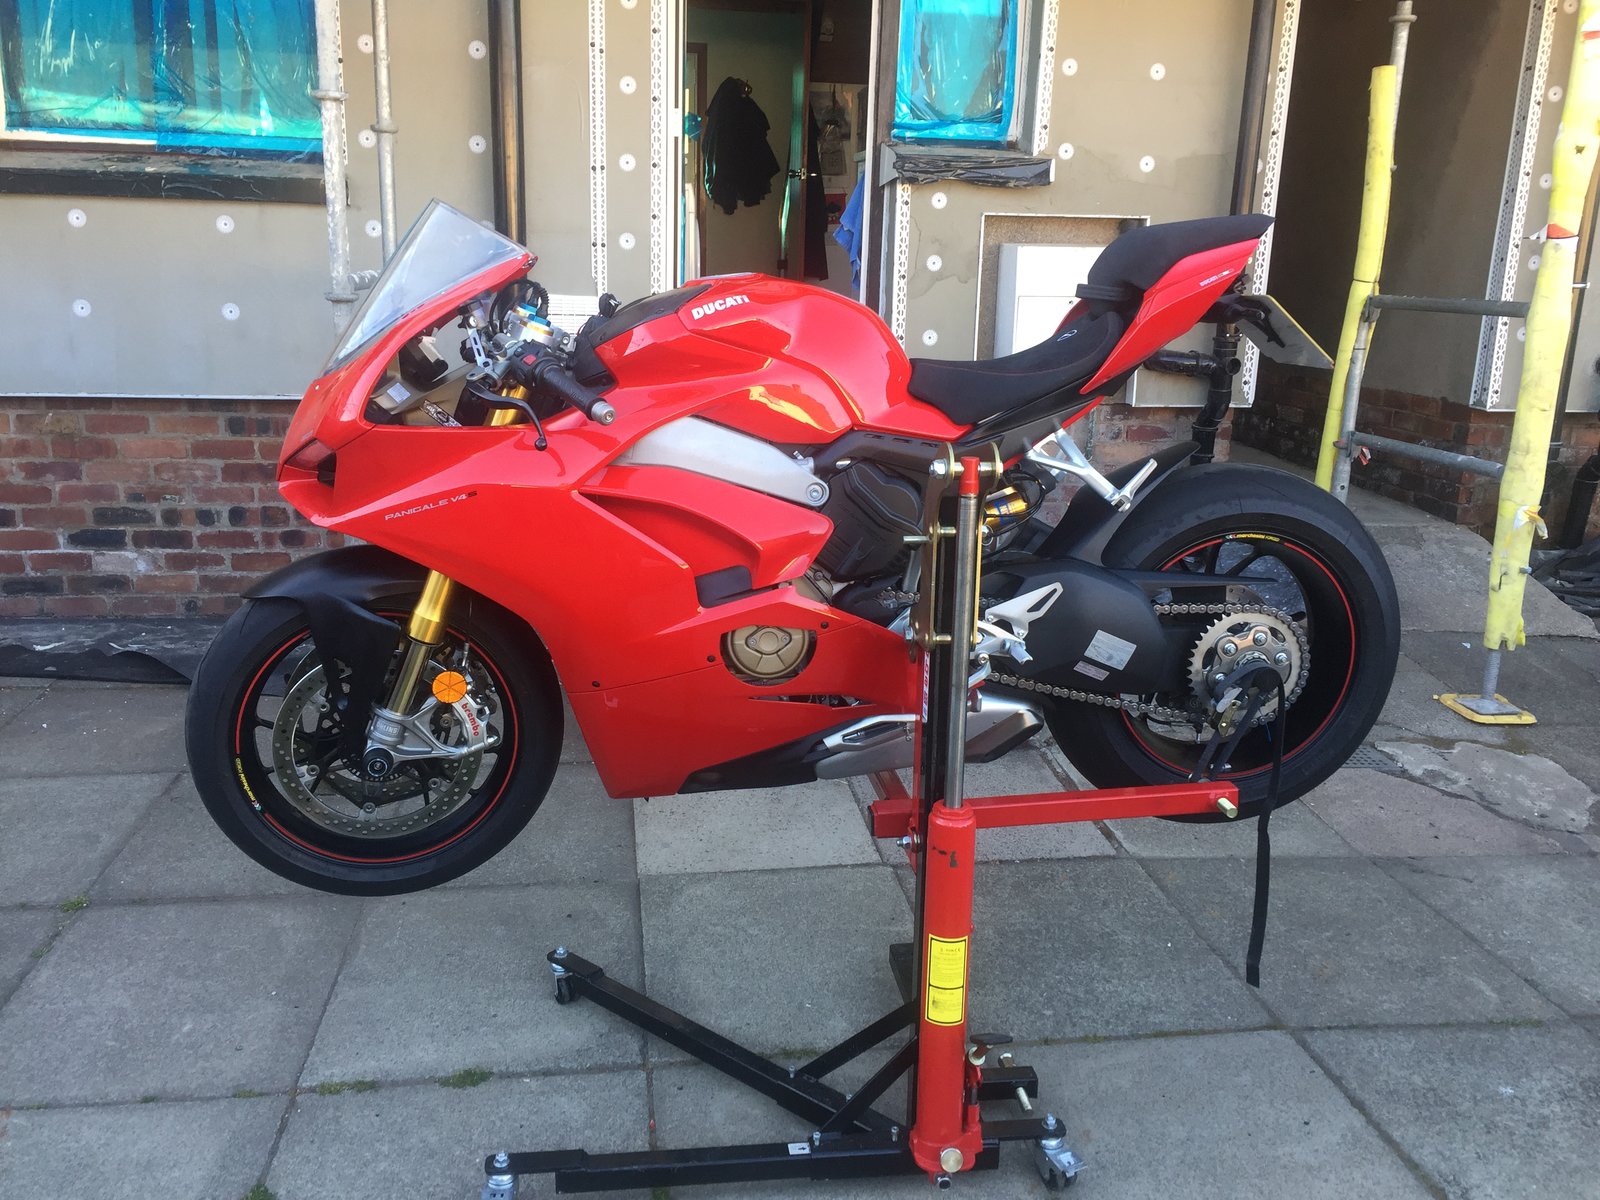 Abba Pro Paddock Stand Fitting Kit For Honda 2016 CBR600RR